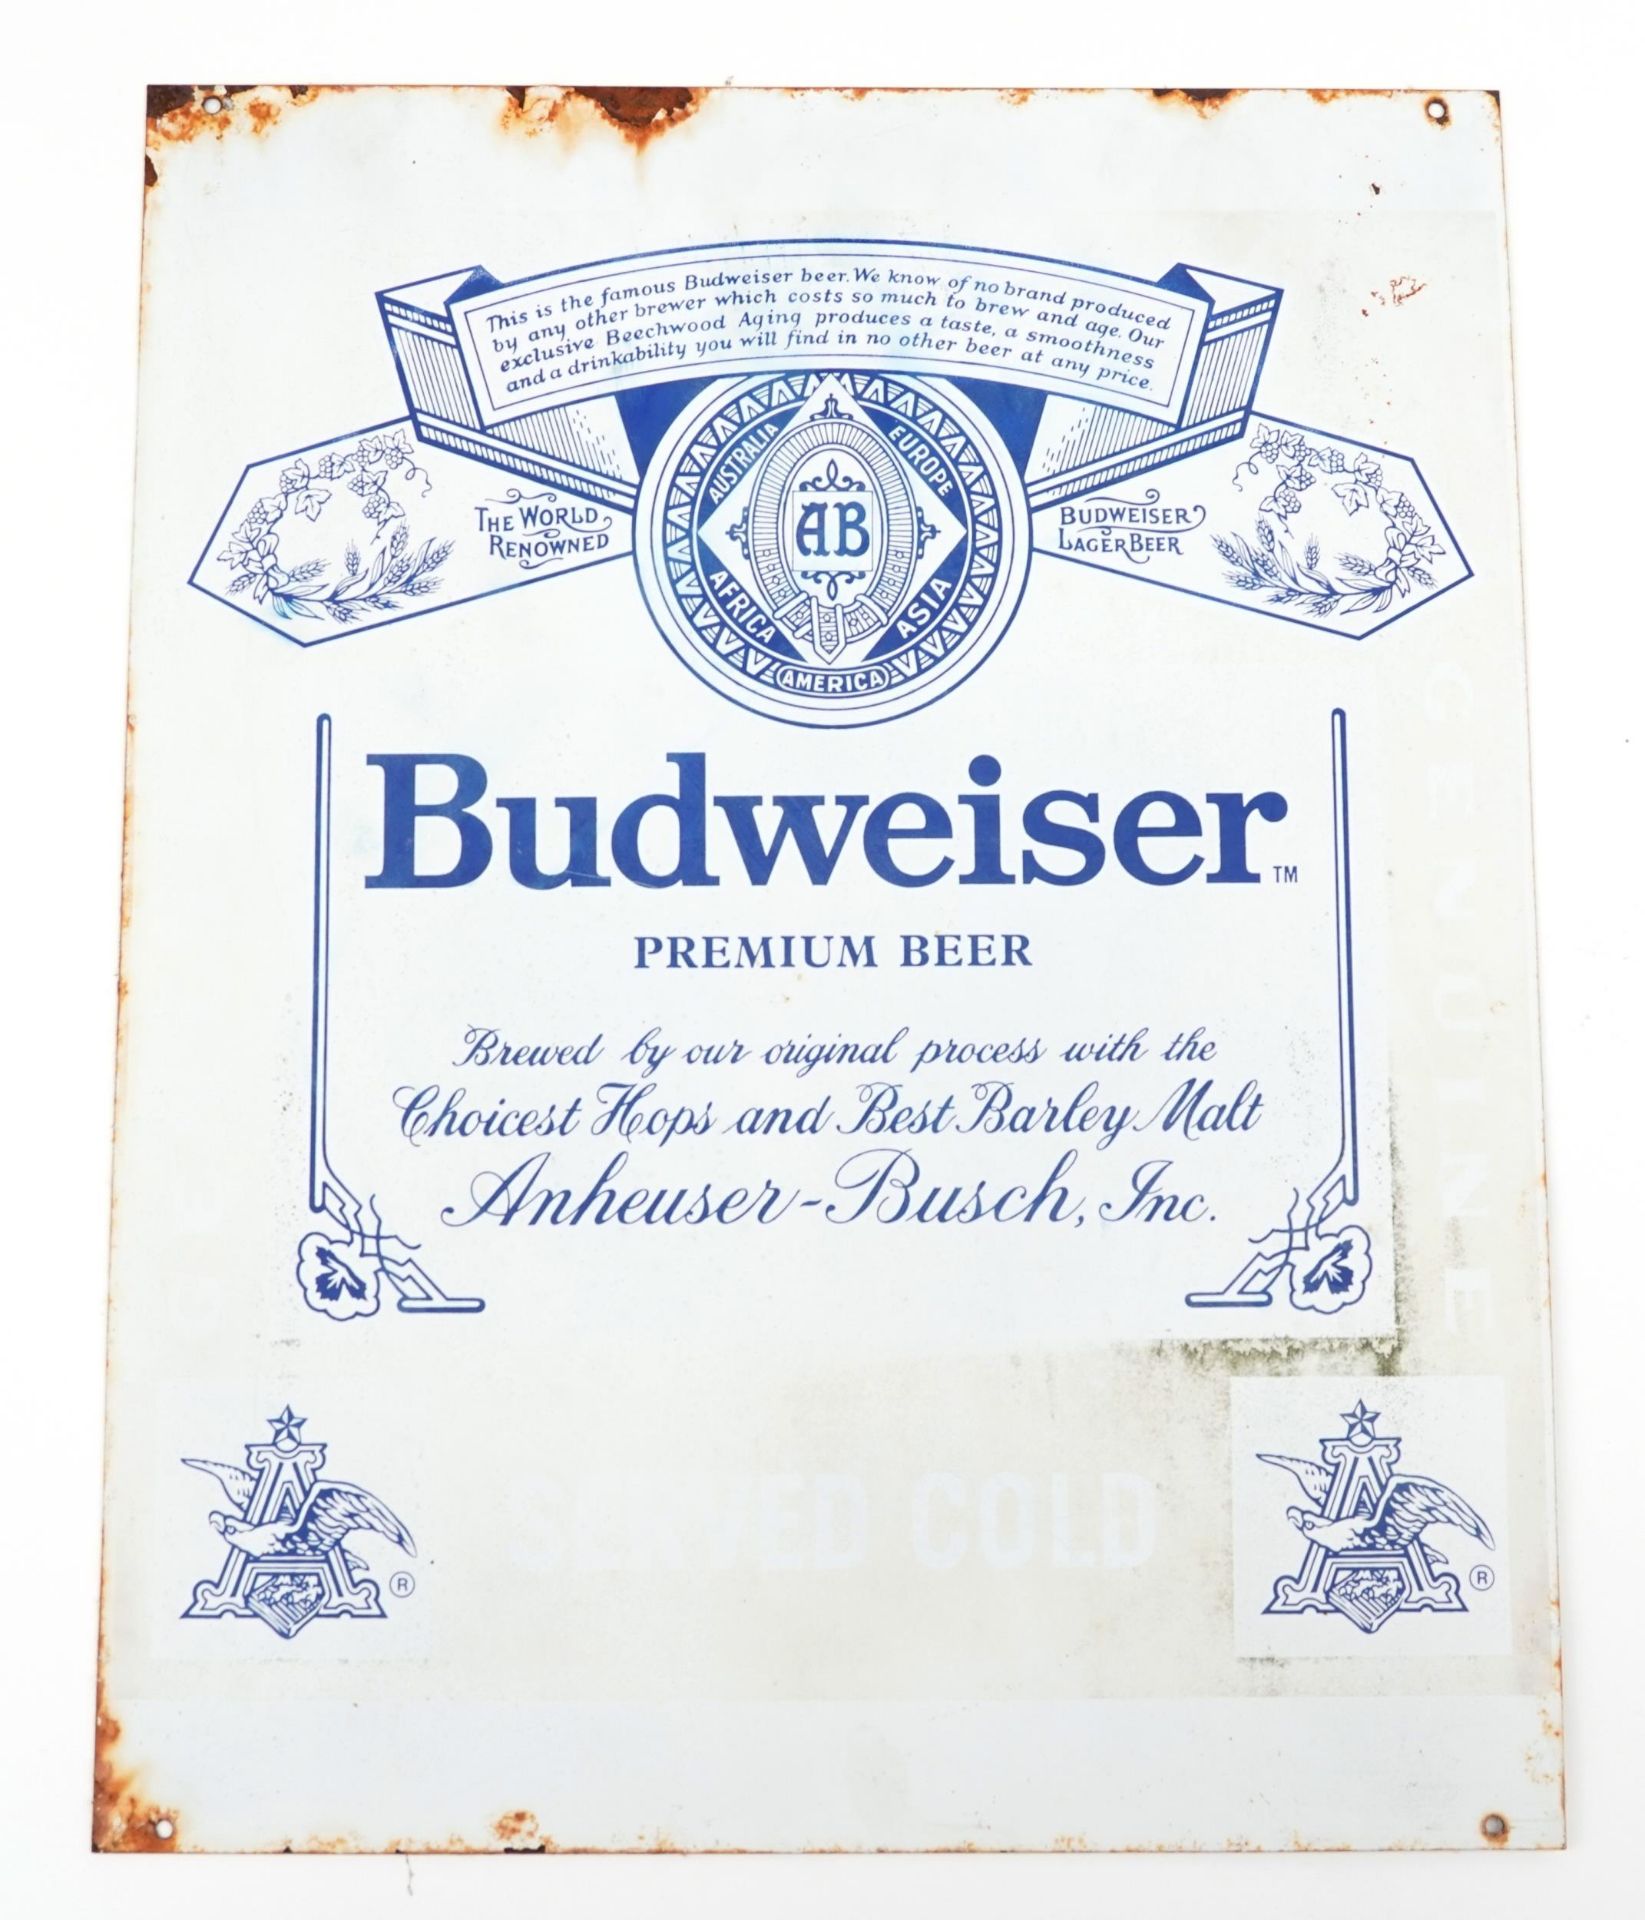 Budweiser Premium Beer aluminium advertising sign, 50cm x 40cm : For further information on this lot